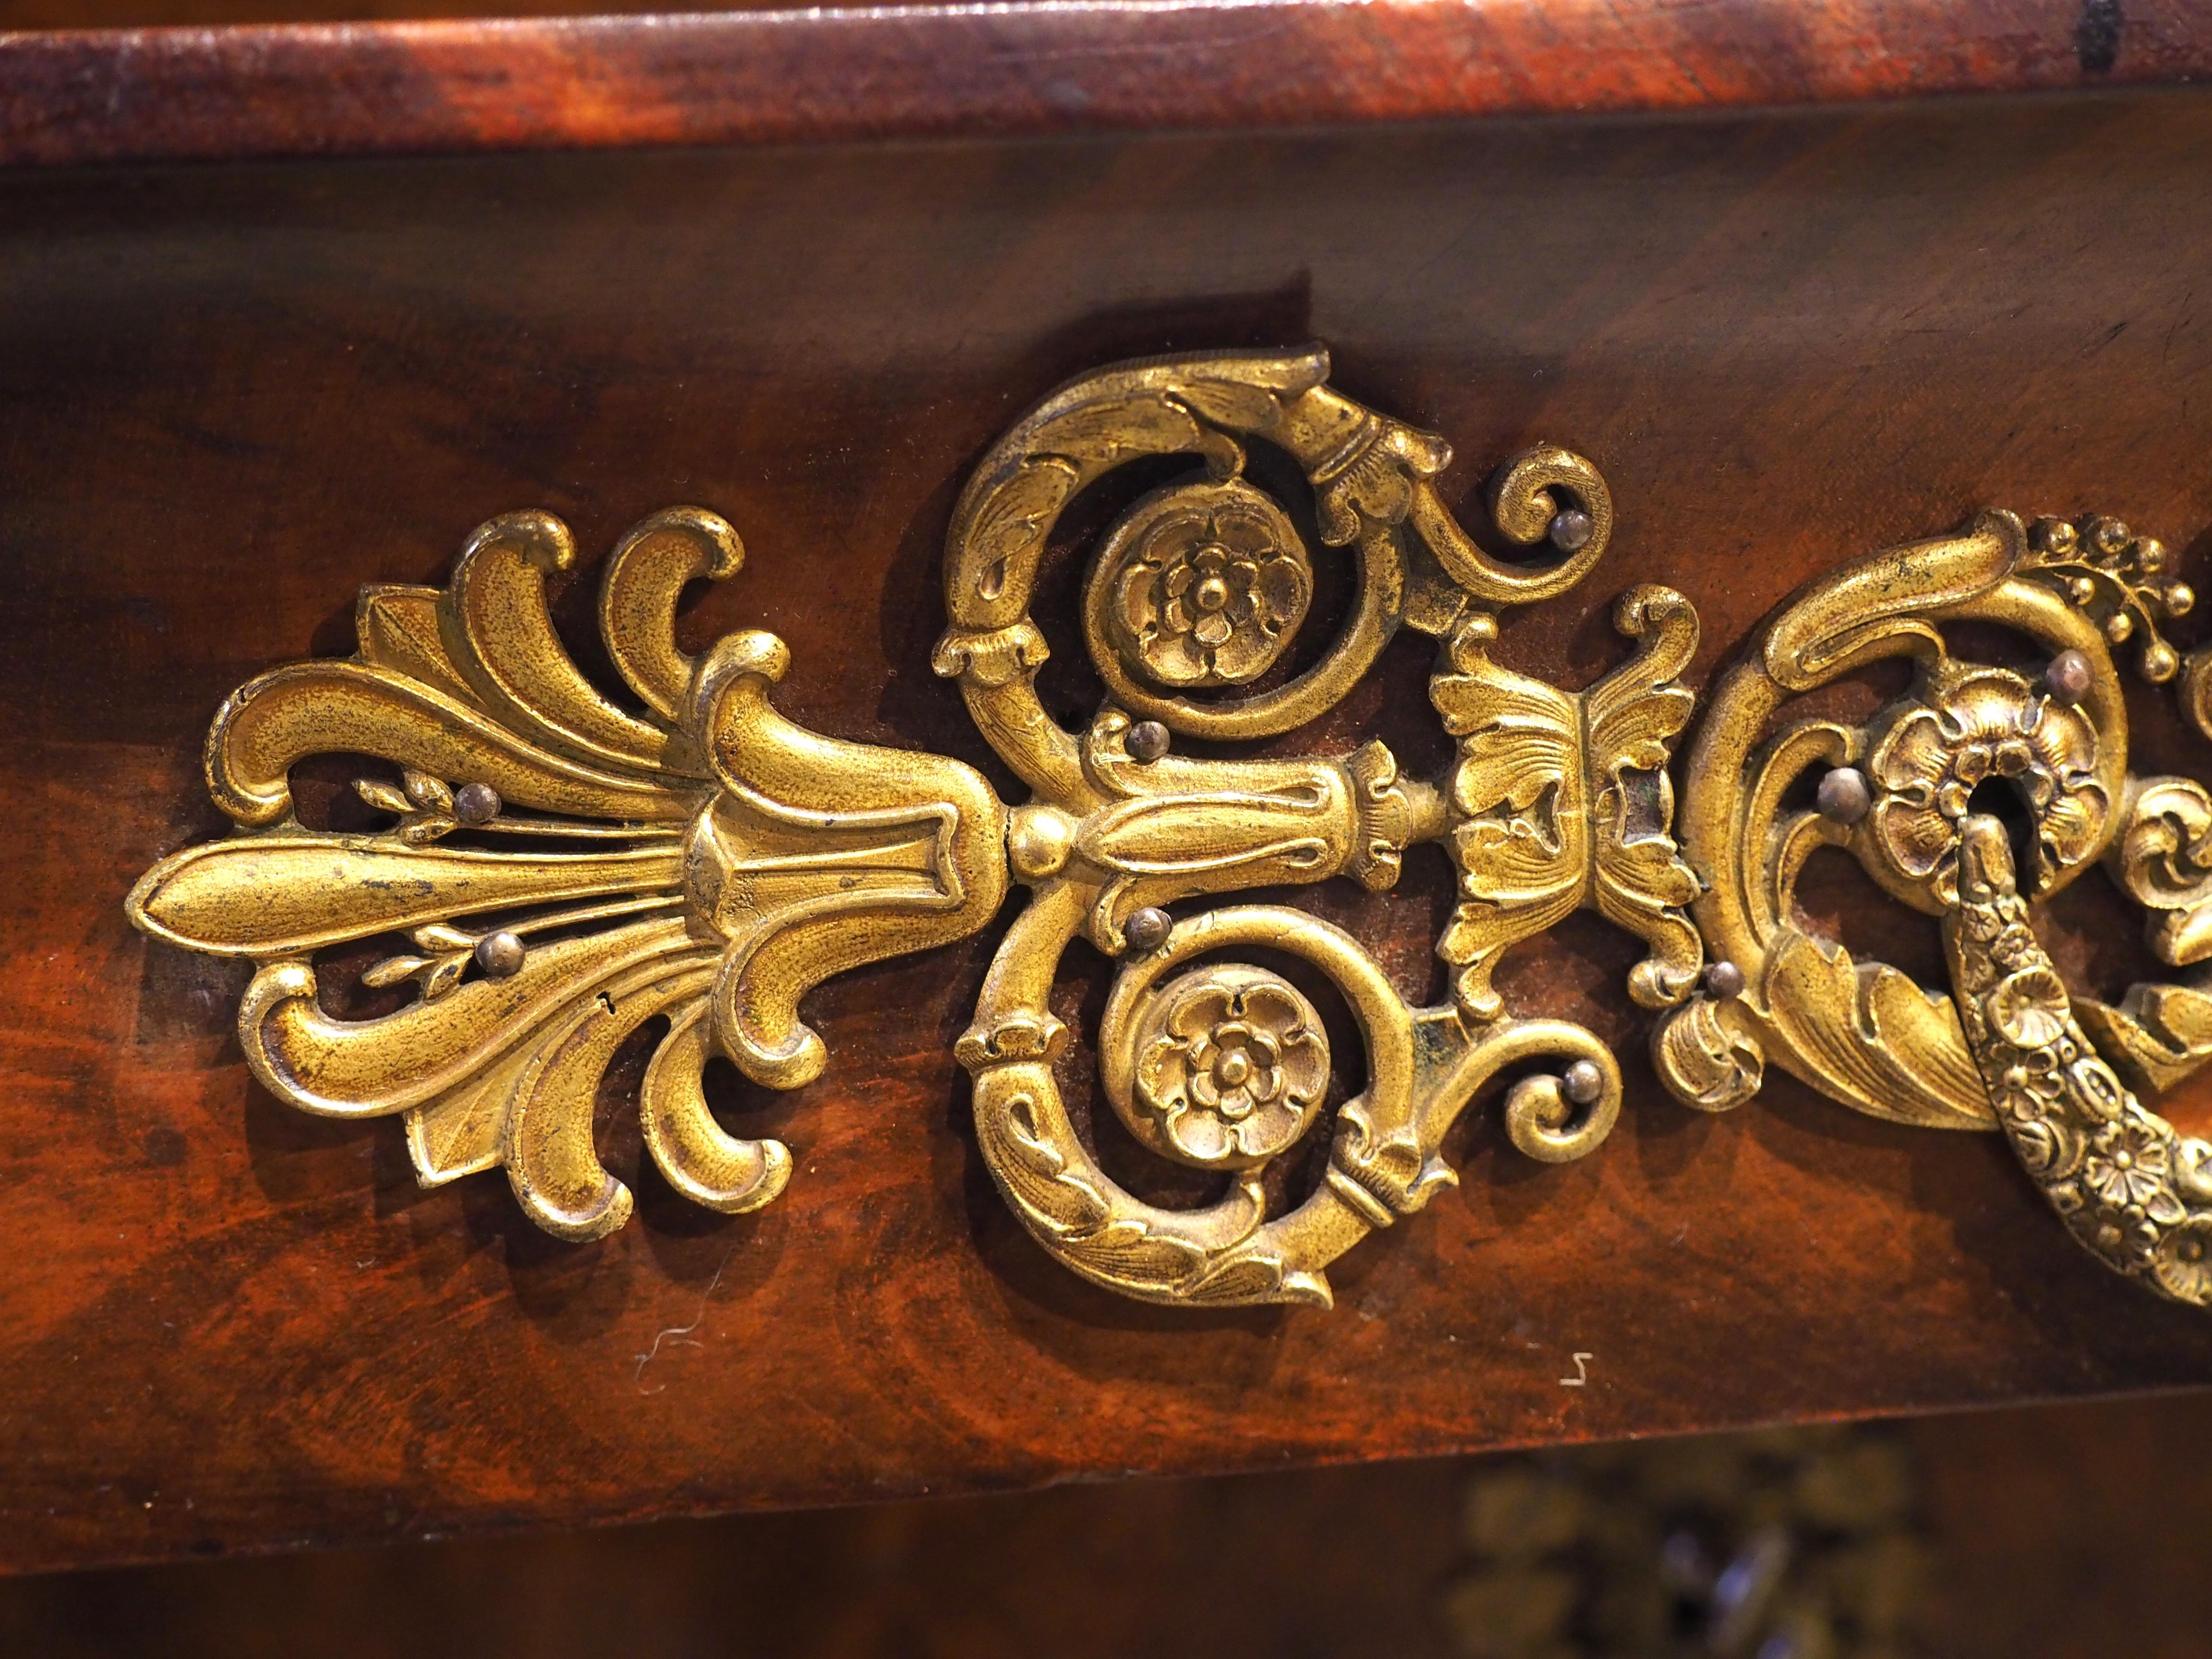 Circa 1820 French Restauration Commode in Flame Mahogany, Gilt Bronze Hardware For Sale 1